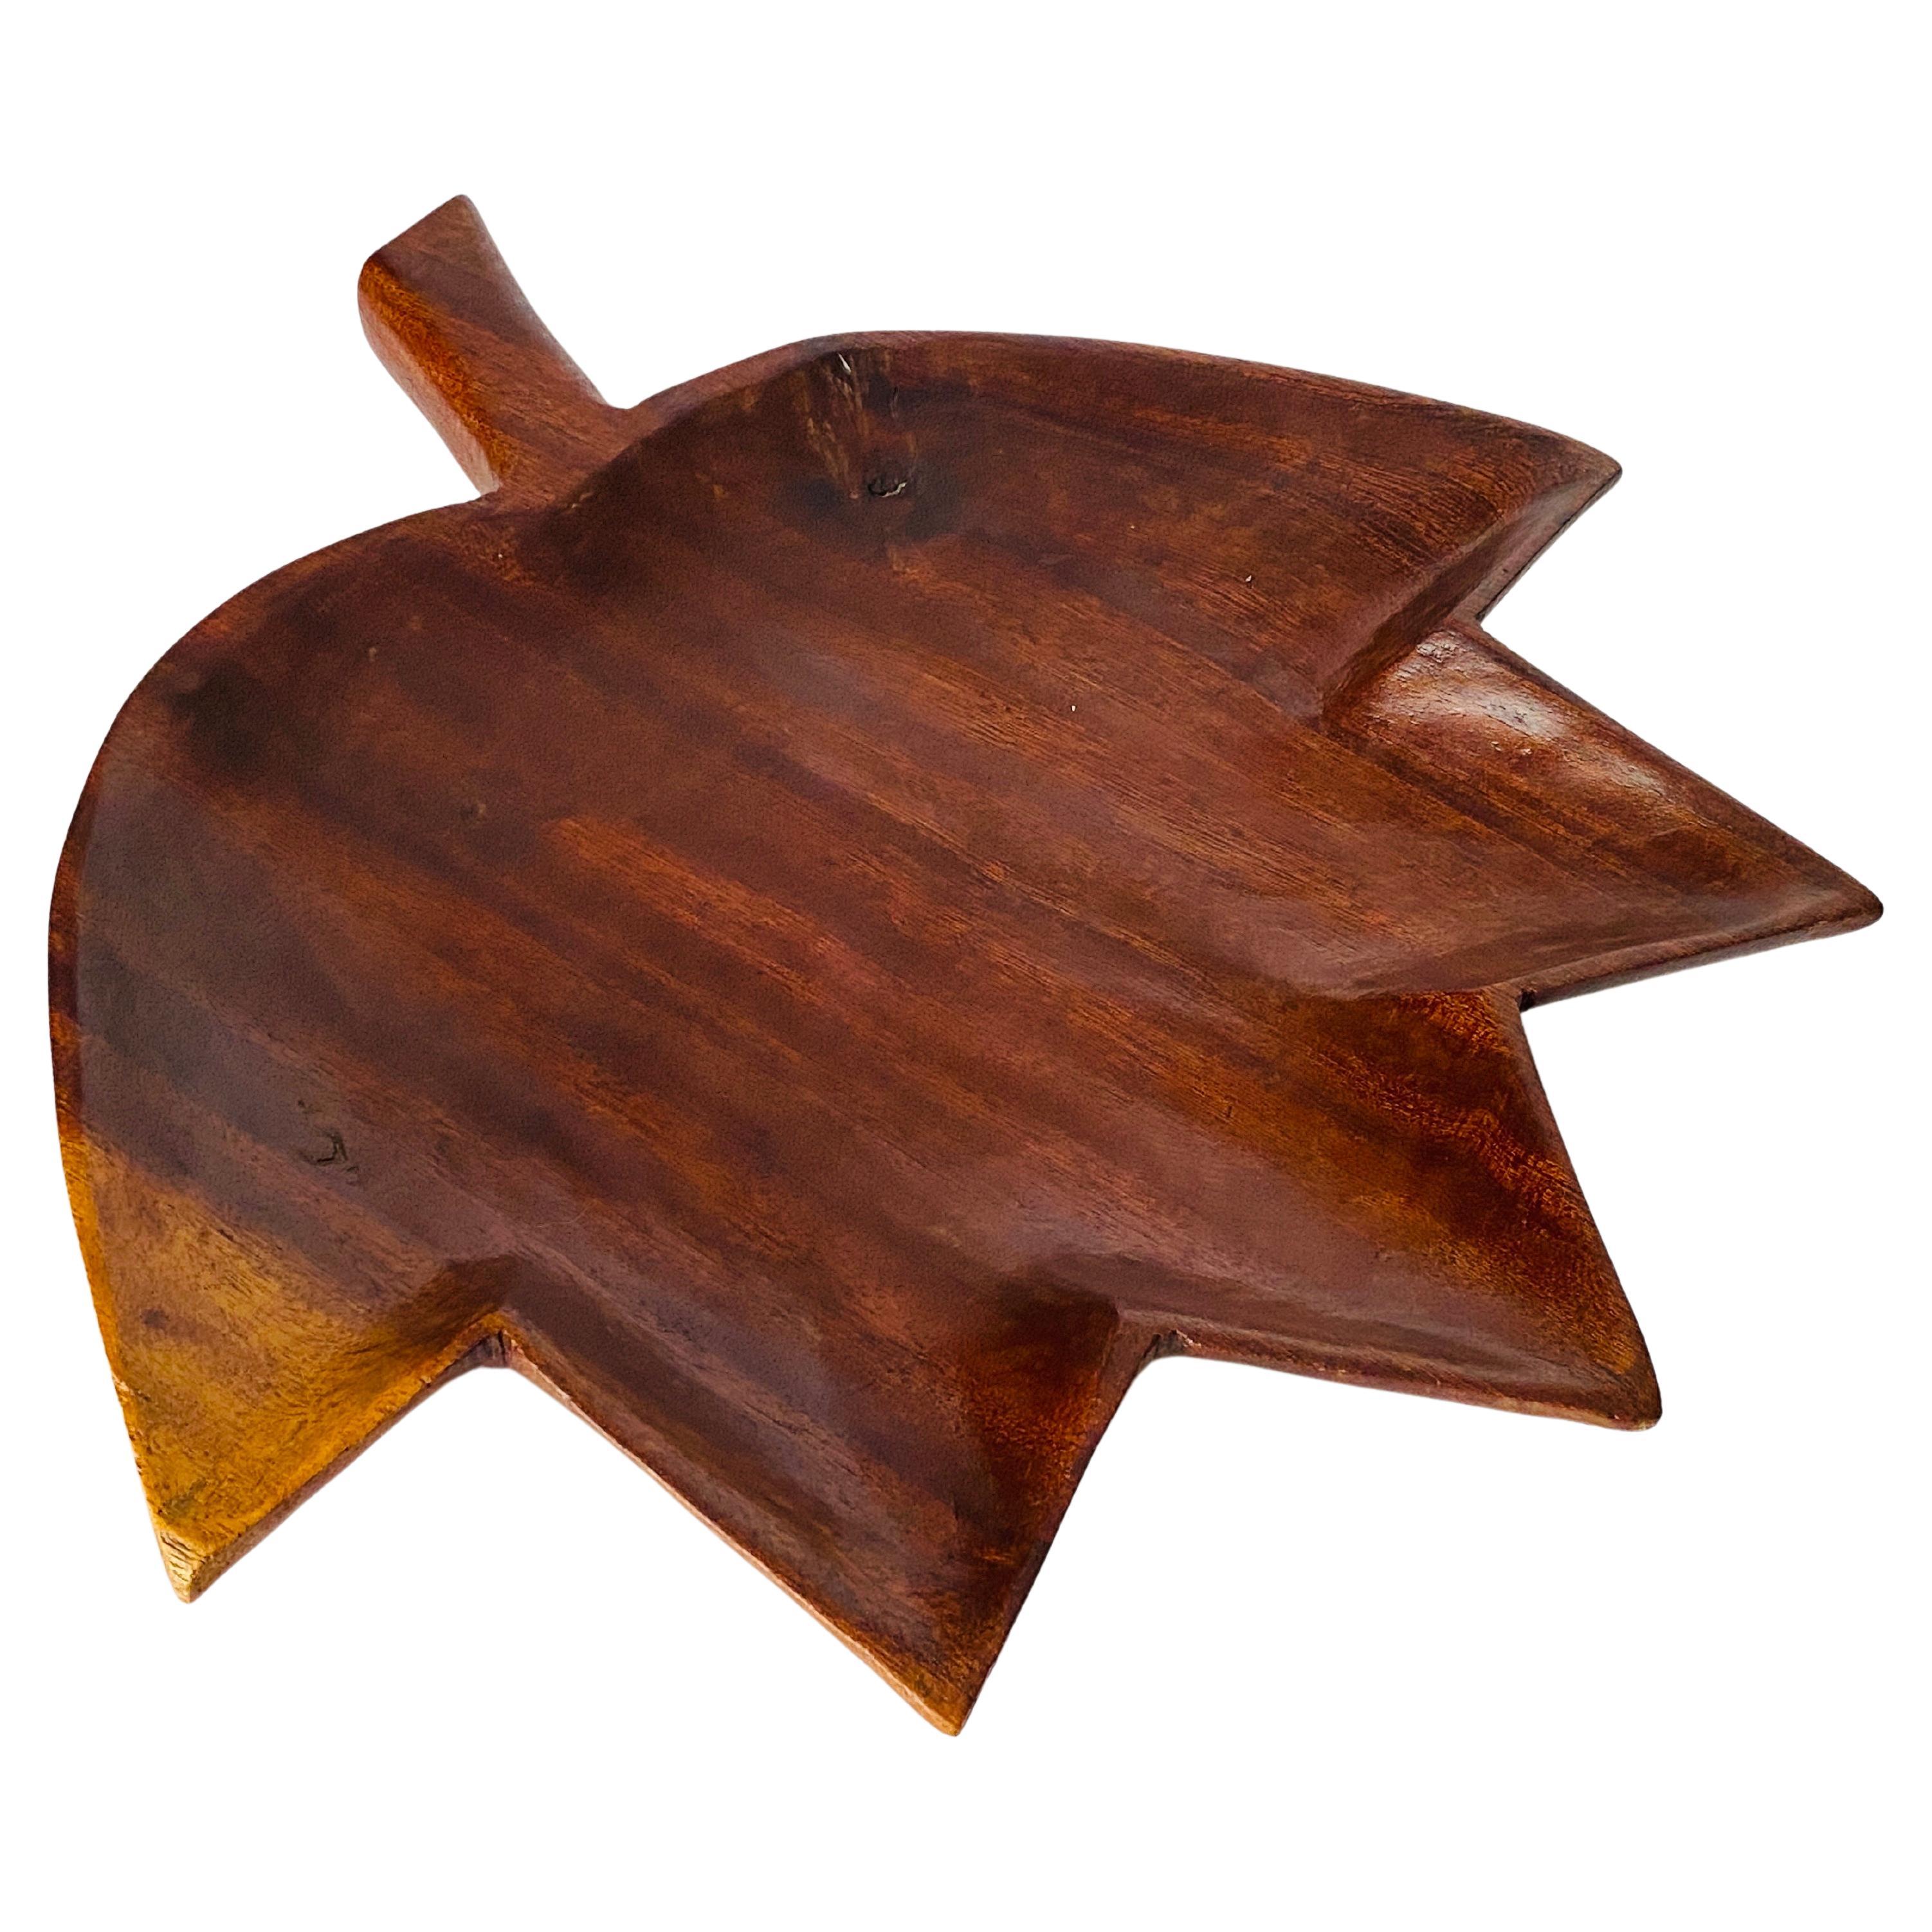 This bowl in a brown color, is quite large. Can be used as a basket, a vide poche, or just as a decorative item.
It has been made in wood, in sweden, circa 1960.